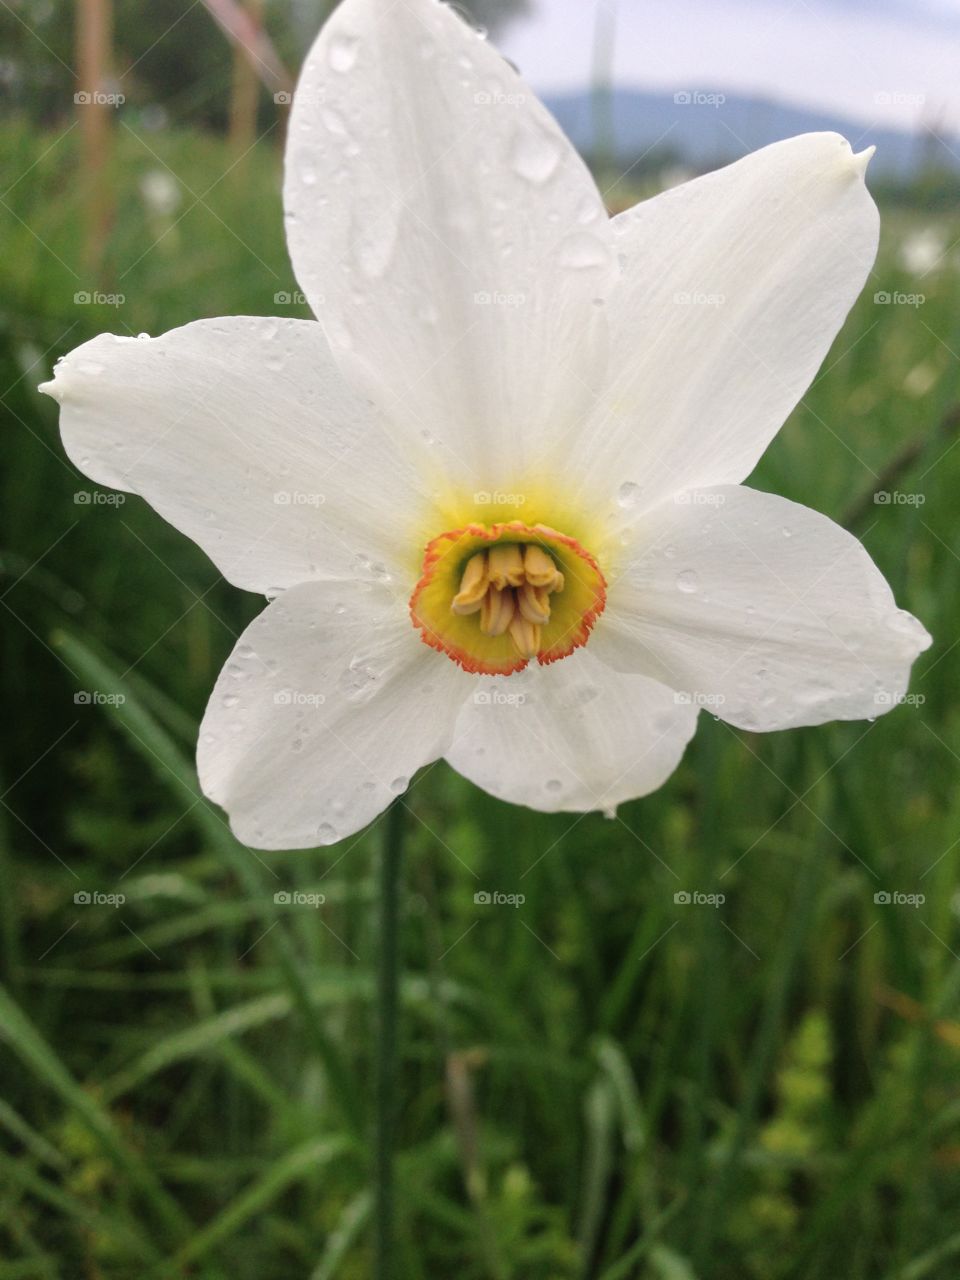 Narcissus after rain